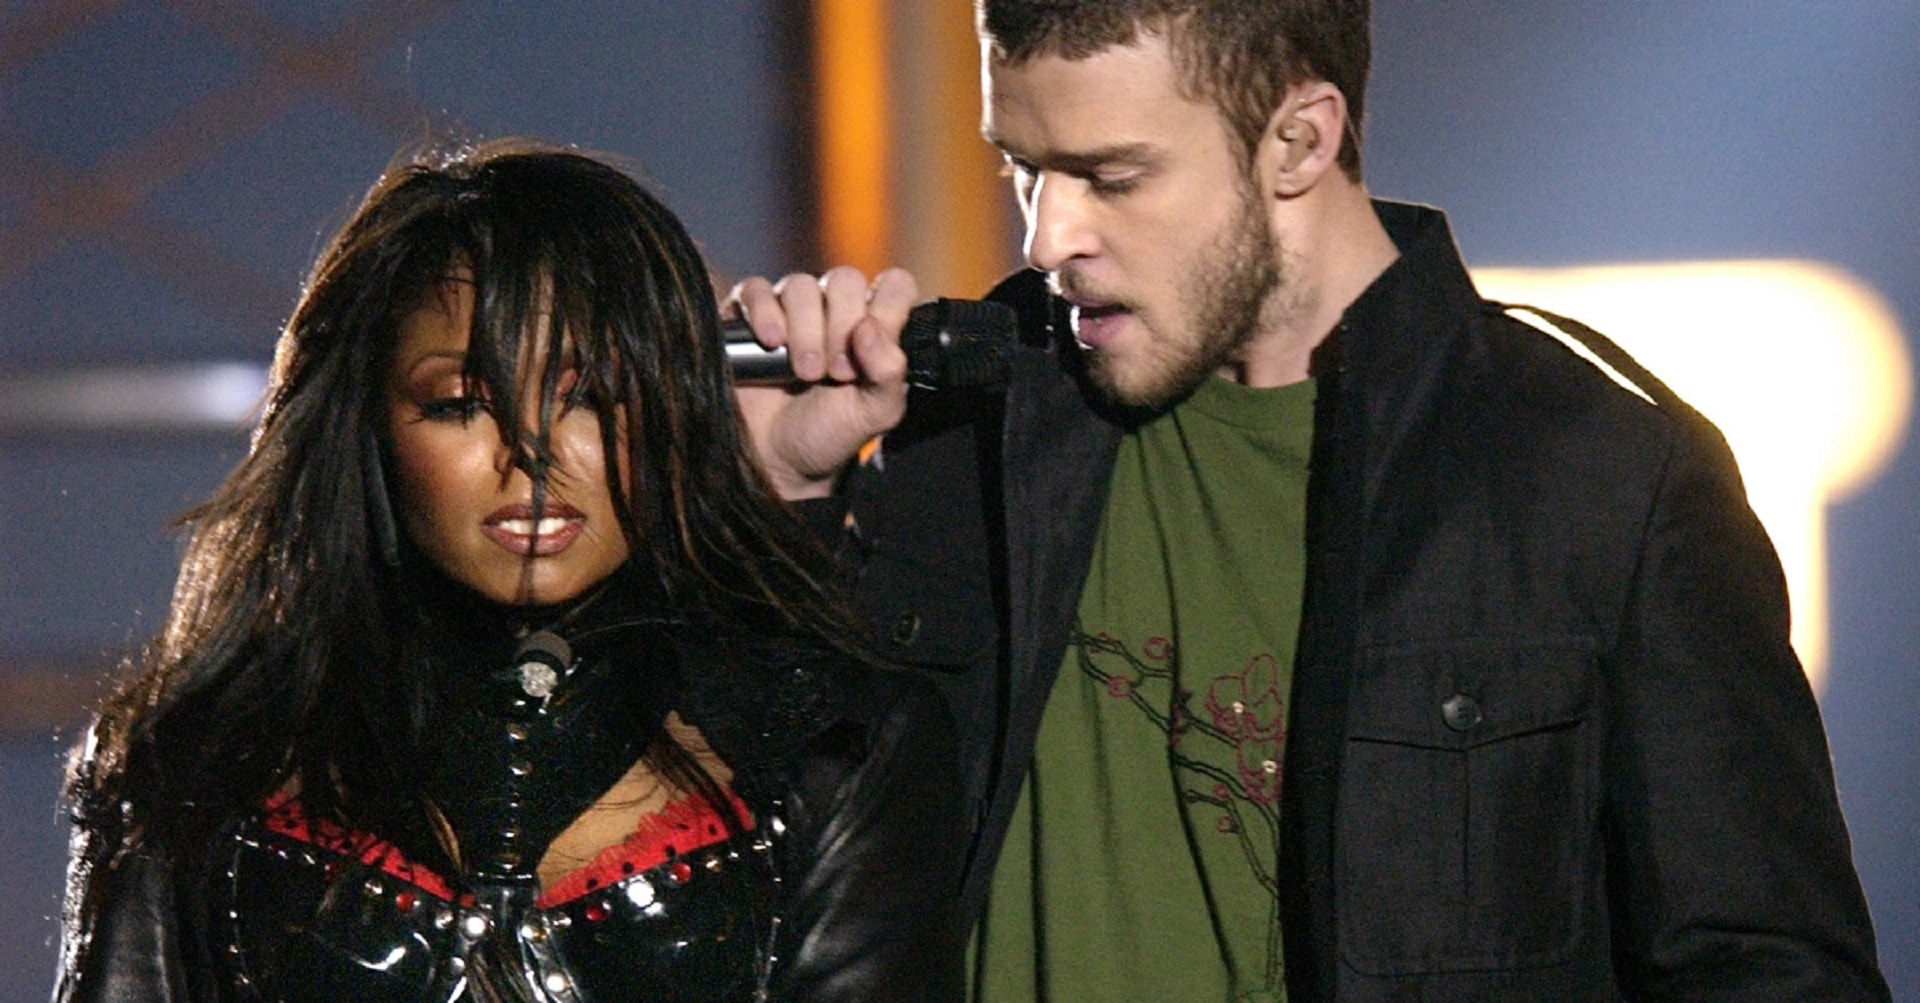 Janet Jackson Super Bowl Controversy To Be Re-Evaluated In New Explosive Documentary!